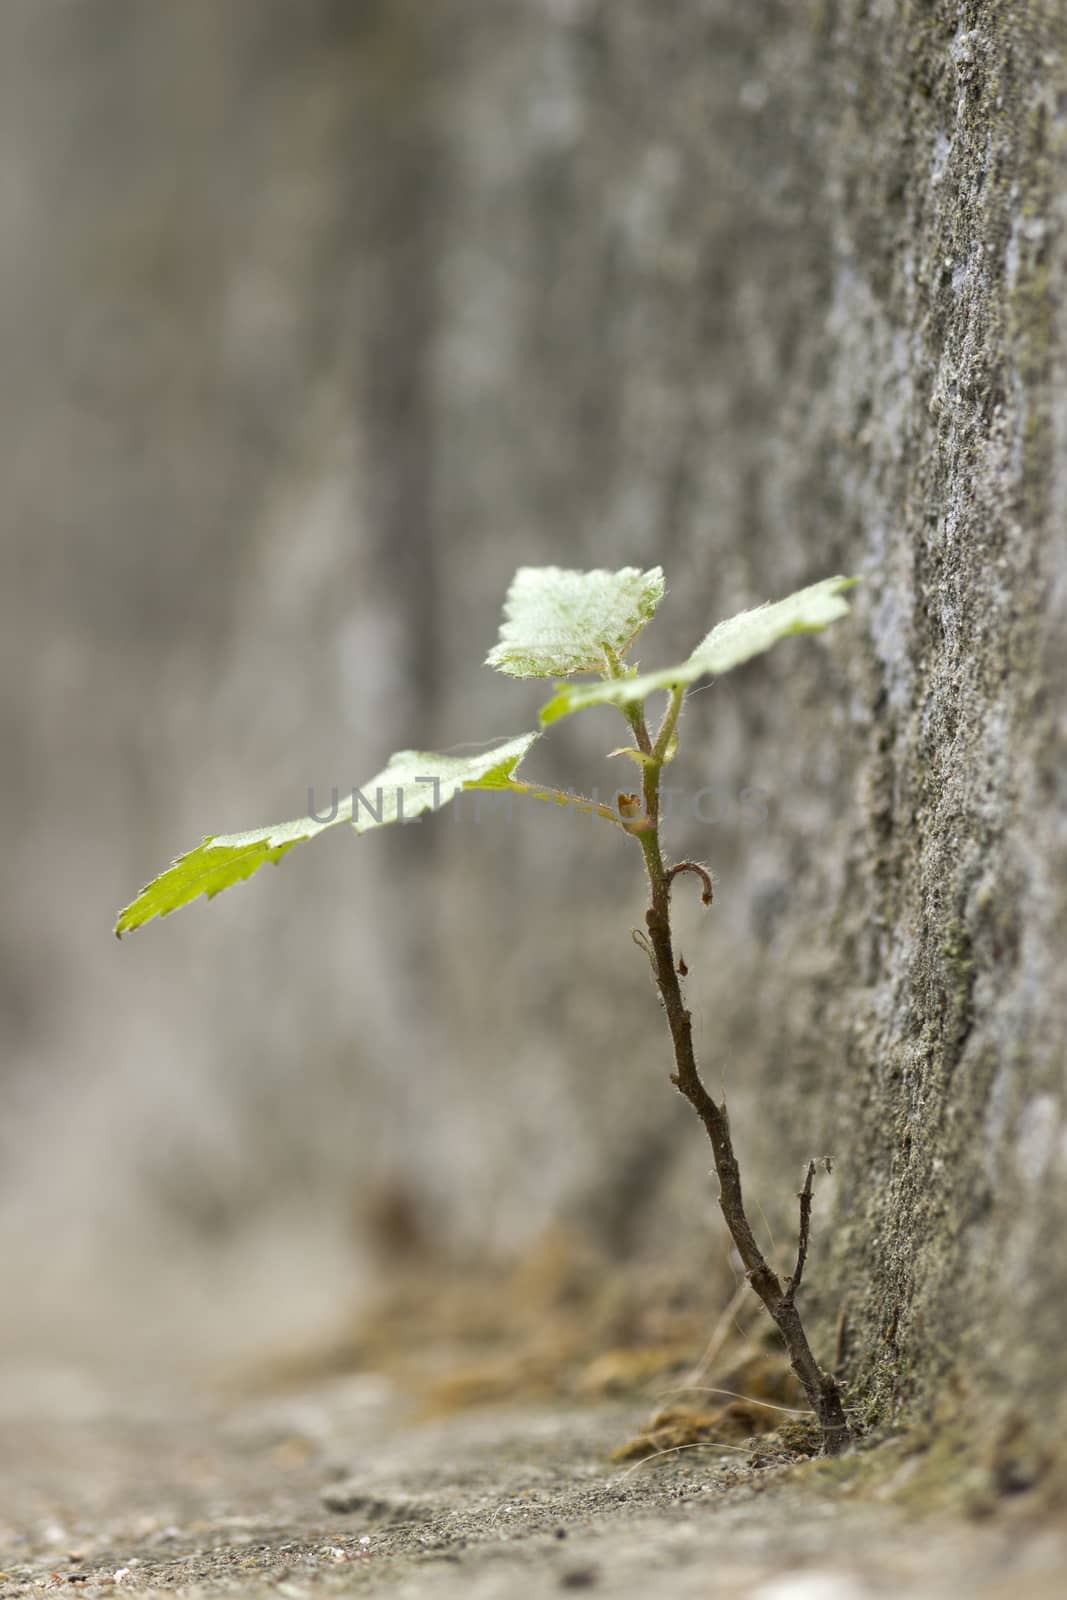 Young plants growing from the corner of the concrete paths.Shallow depth of field.